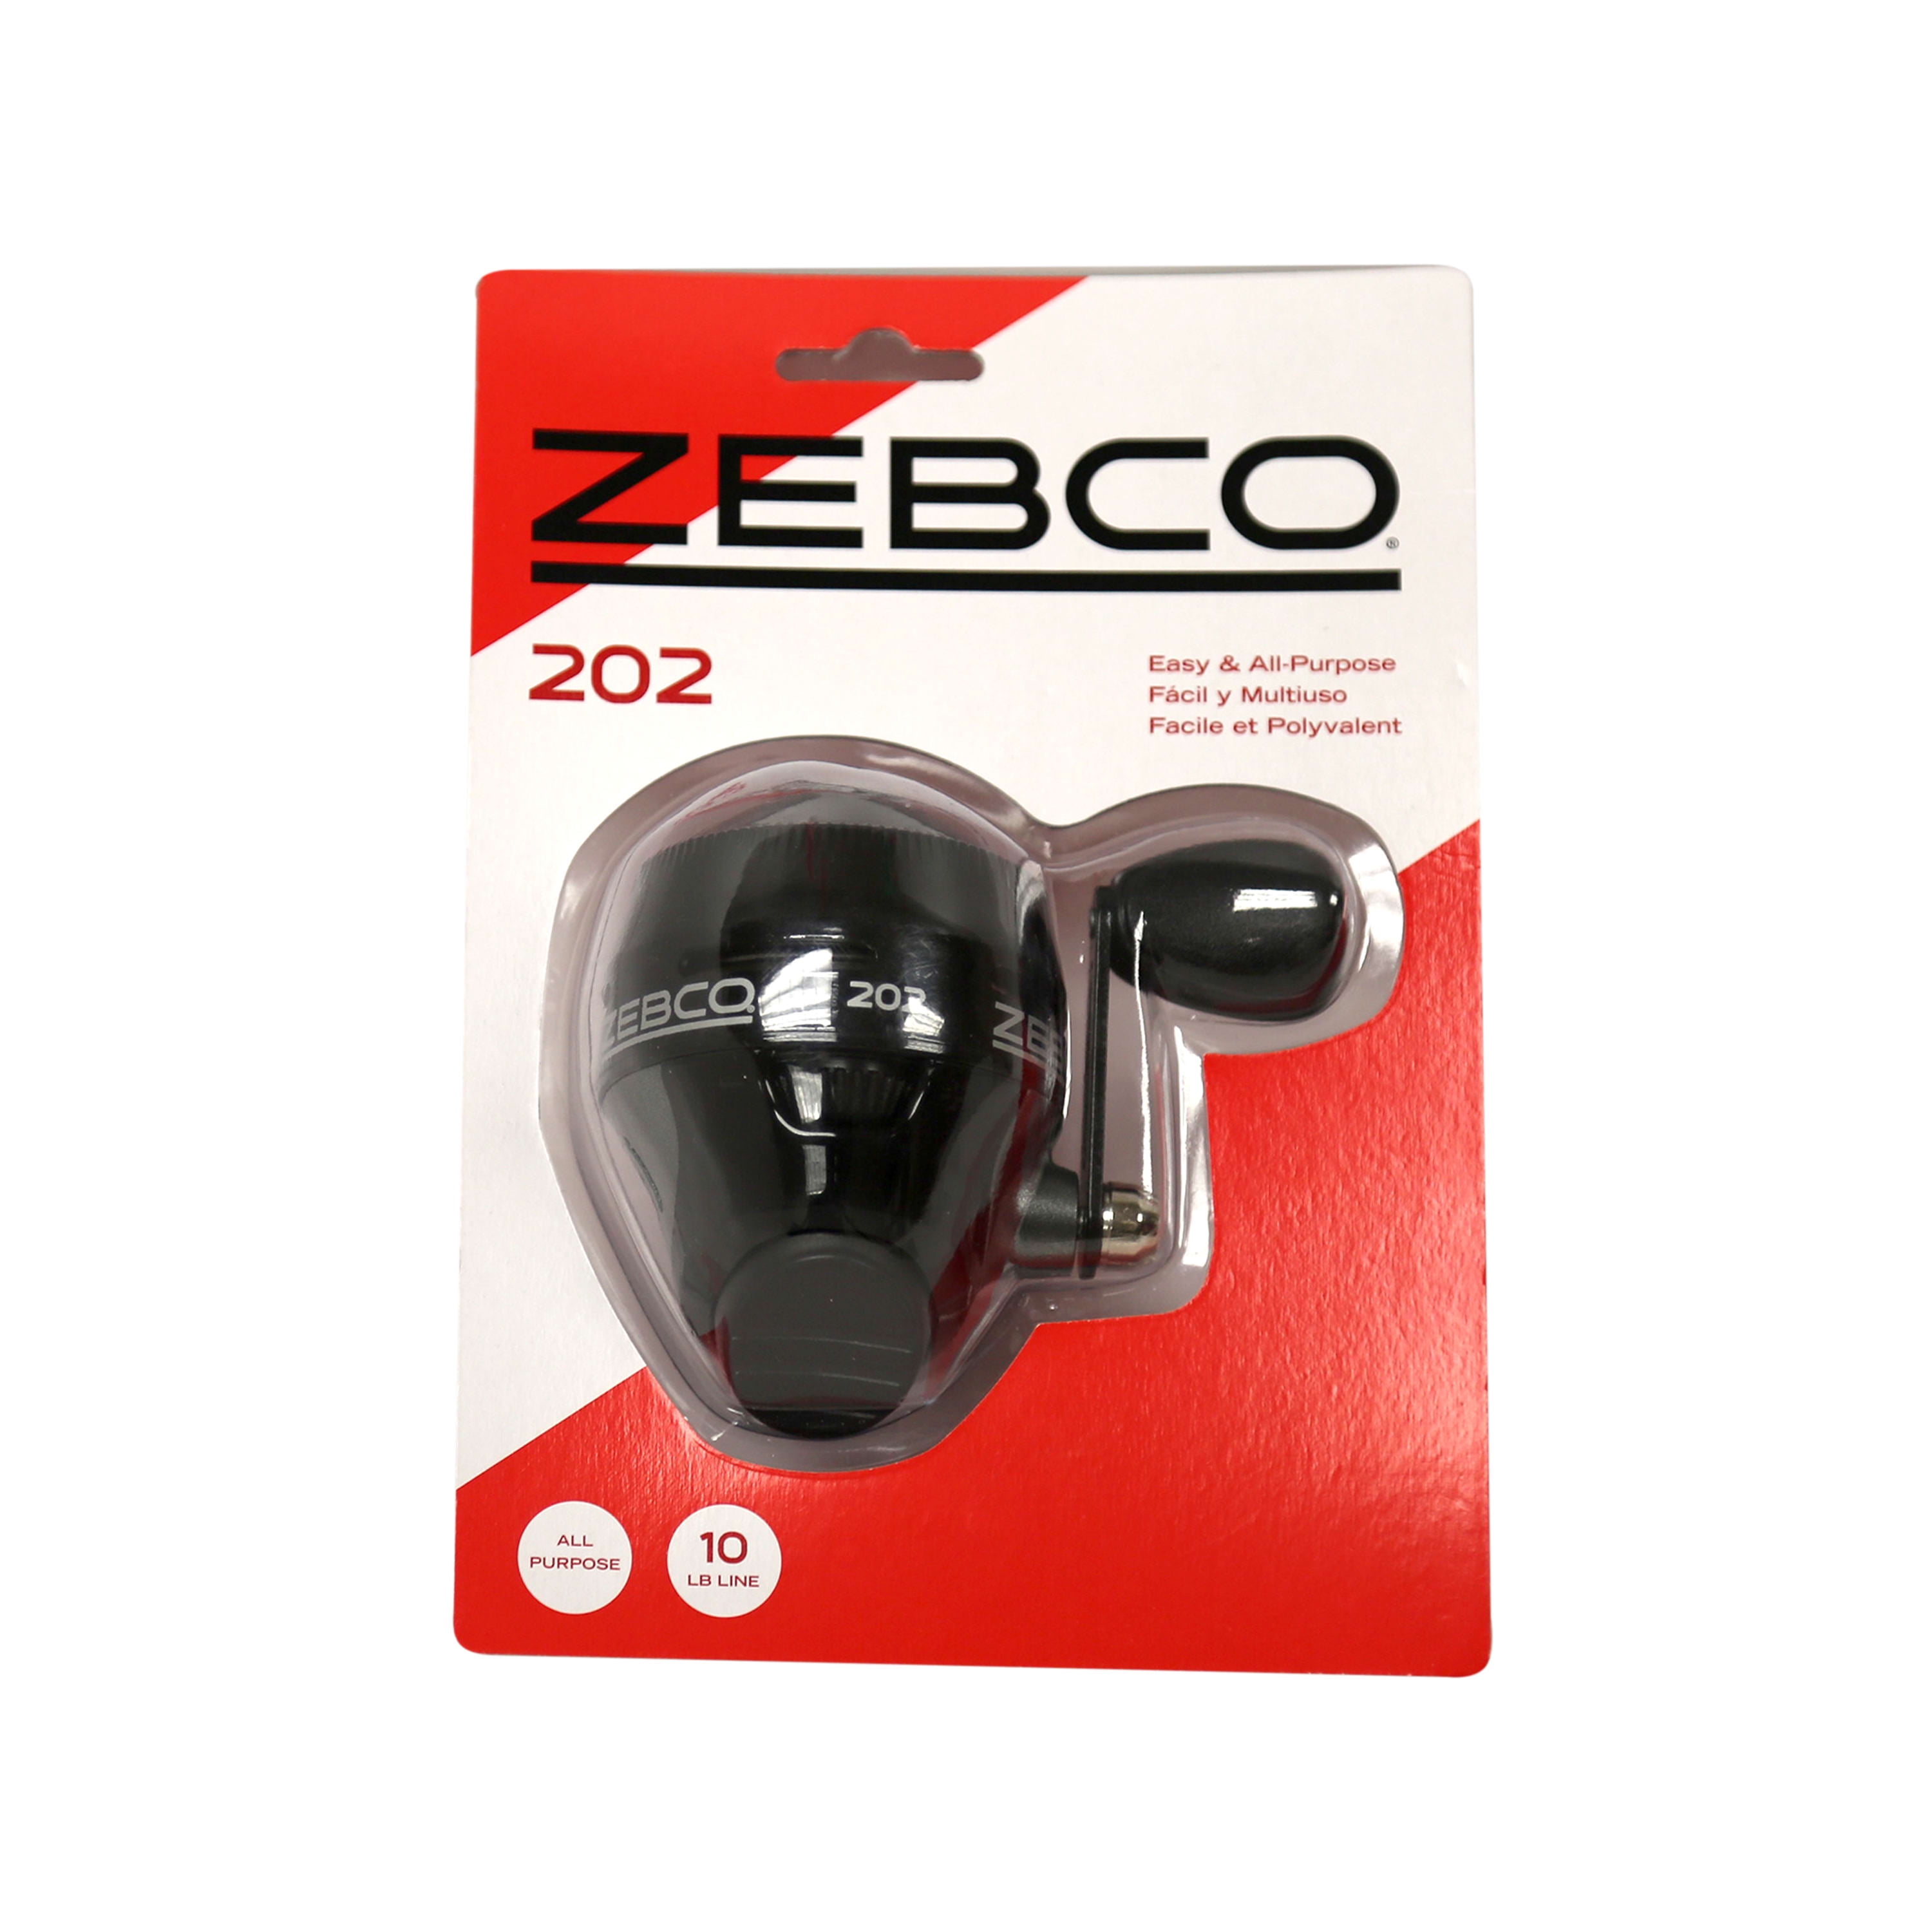  Zebco 202 Spincast Fishing Reel, Size 30 Reel, Right-Hand  Retrieve, Durable All-Metal Gears, Stainless Steel Pick-up Pin, Pre-Spooled  with 10-Pound Zebco Fishing Line, Black, Clam Packaging : Sports & Outdoors